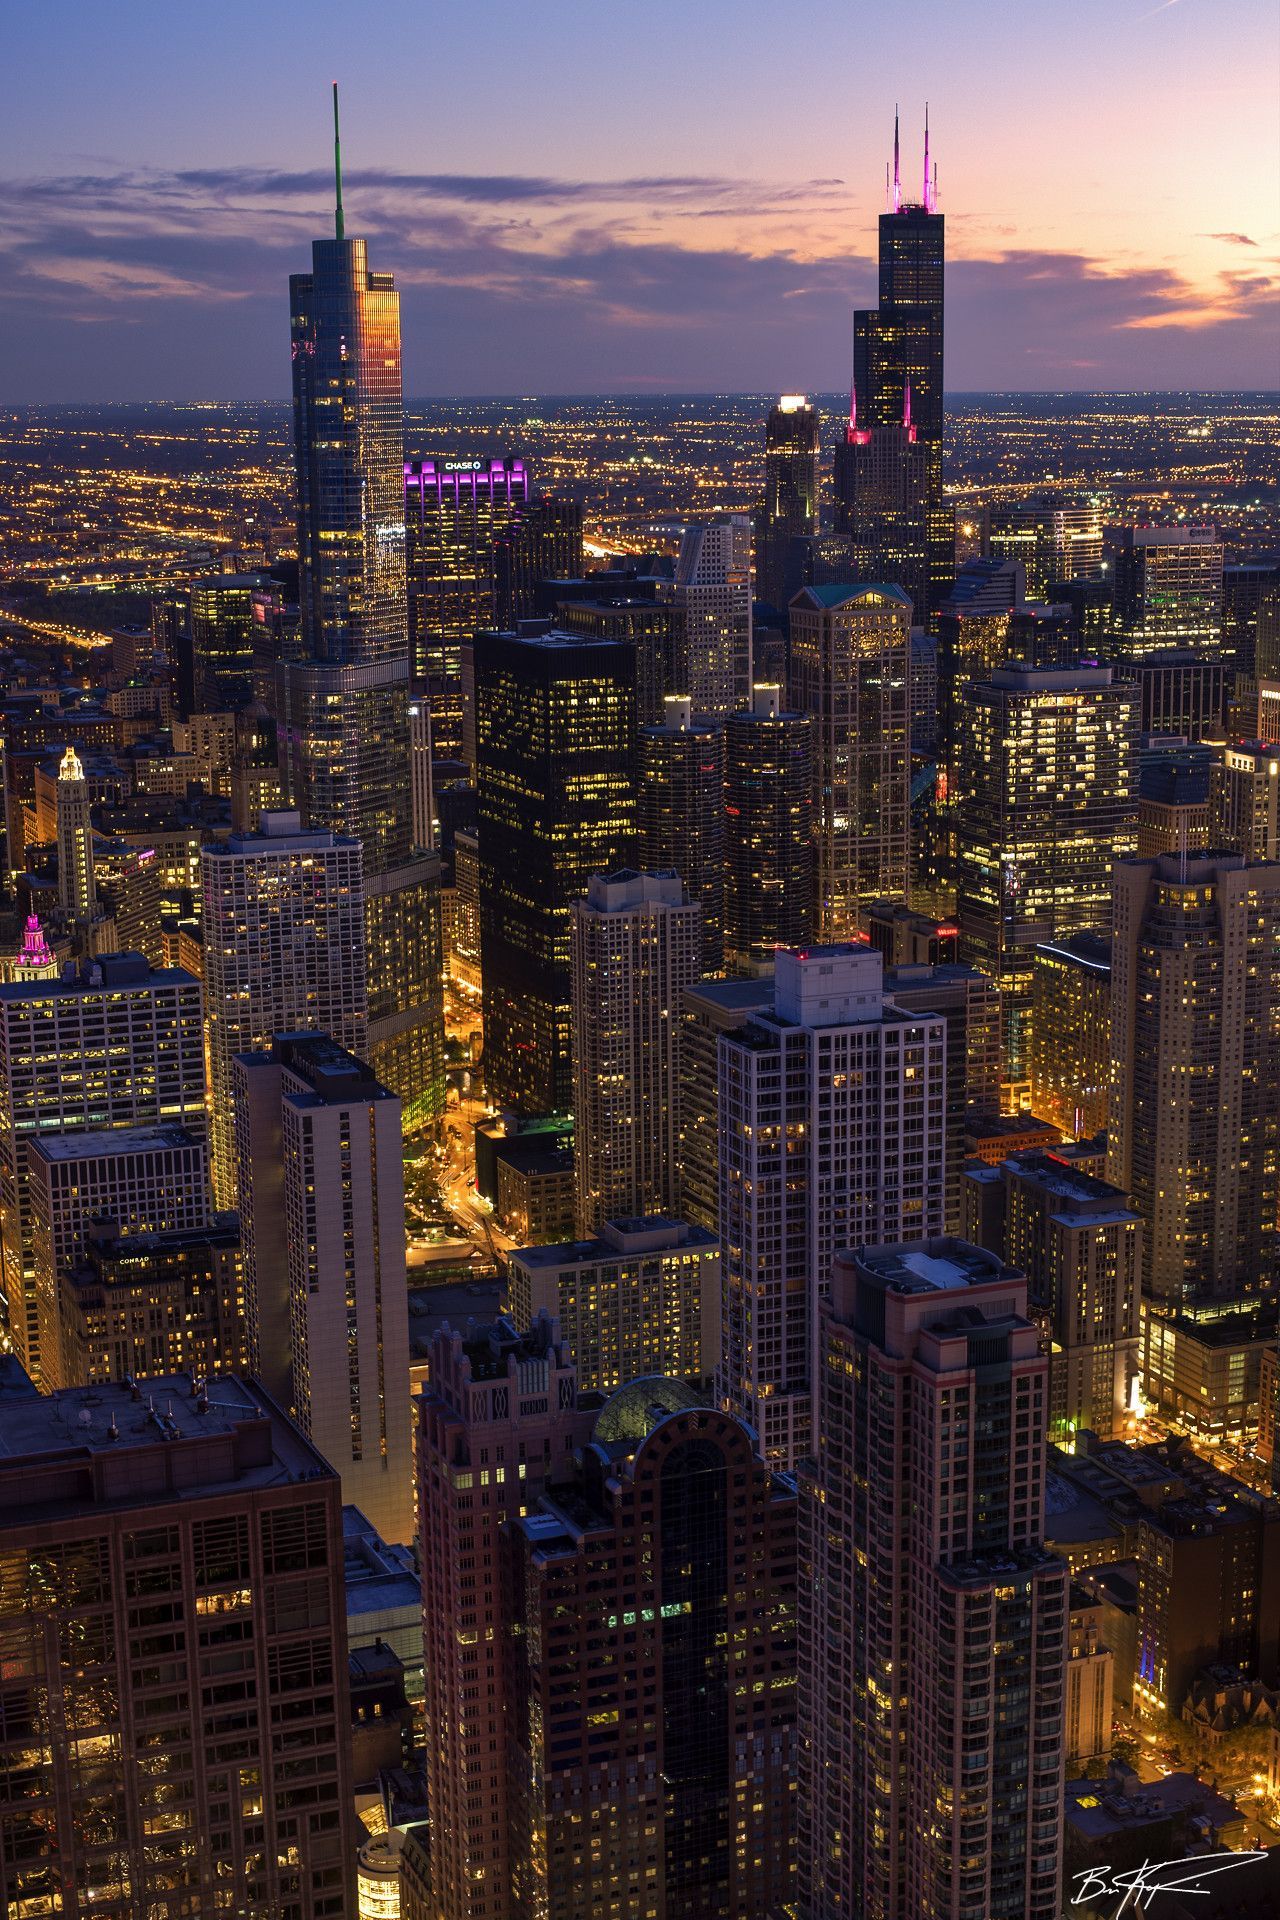 A city skyline at night with buildings and lights - Chicago